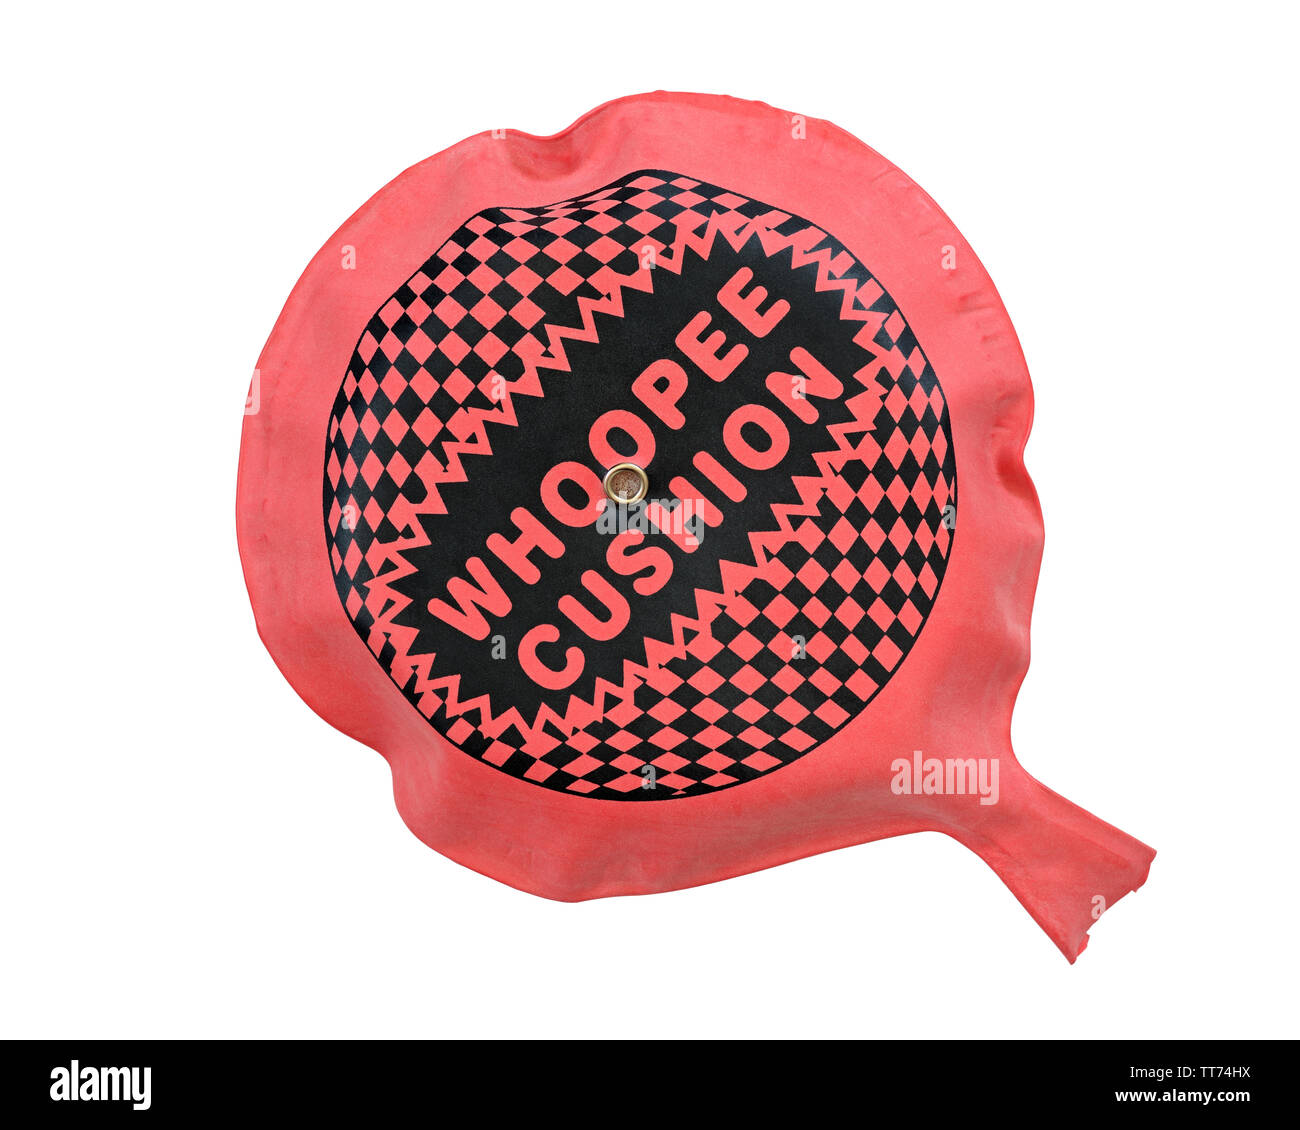 Whoopee Cushion, Cut Out Stock Photo